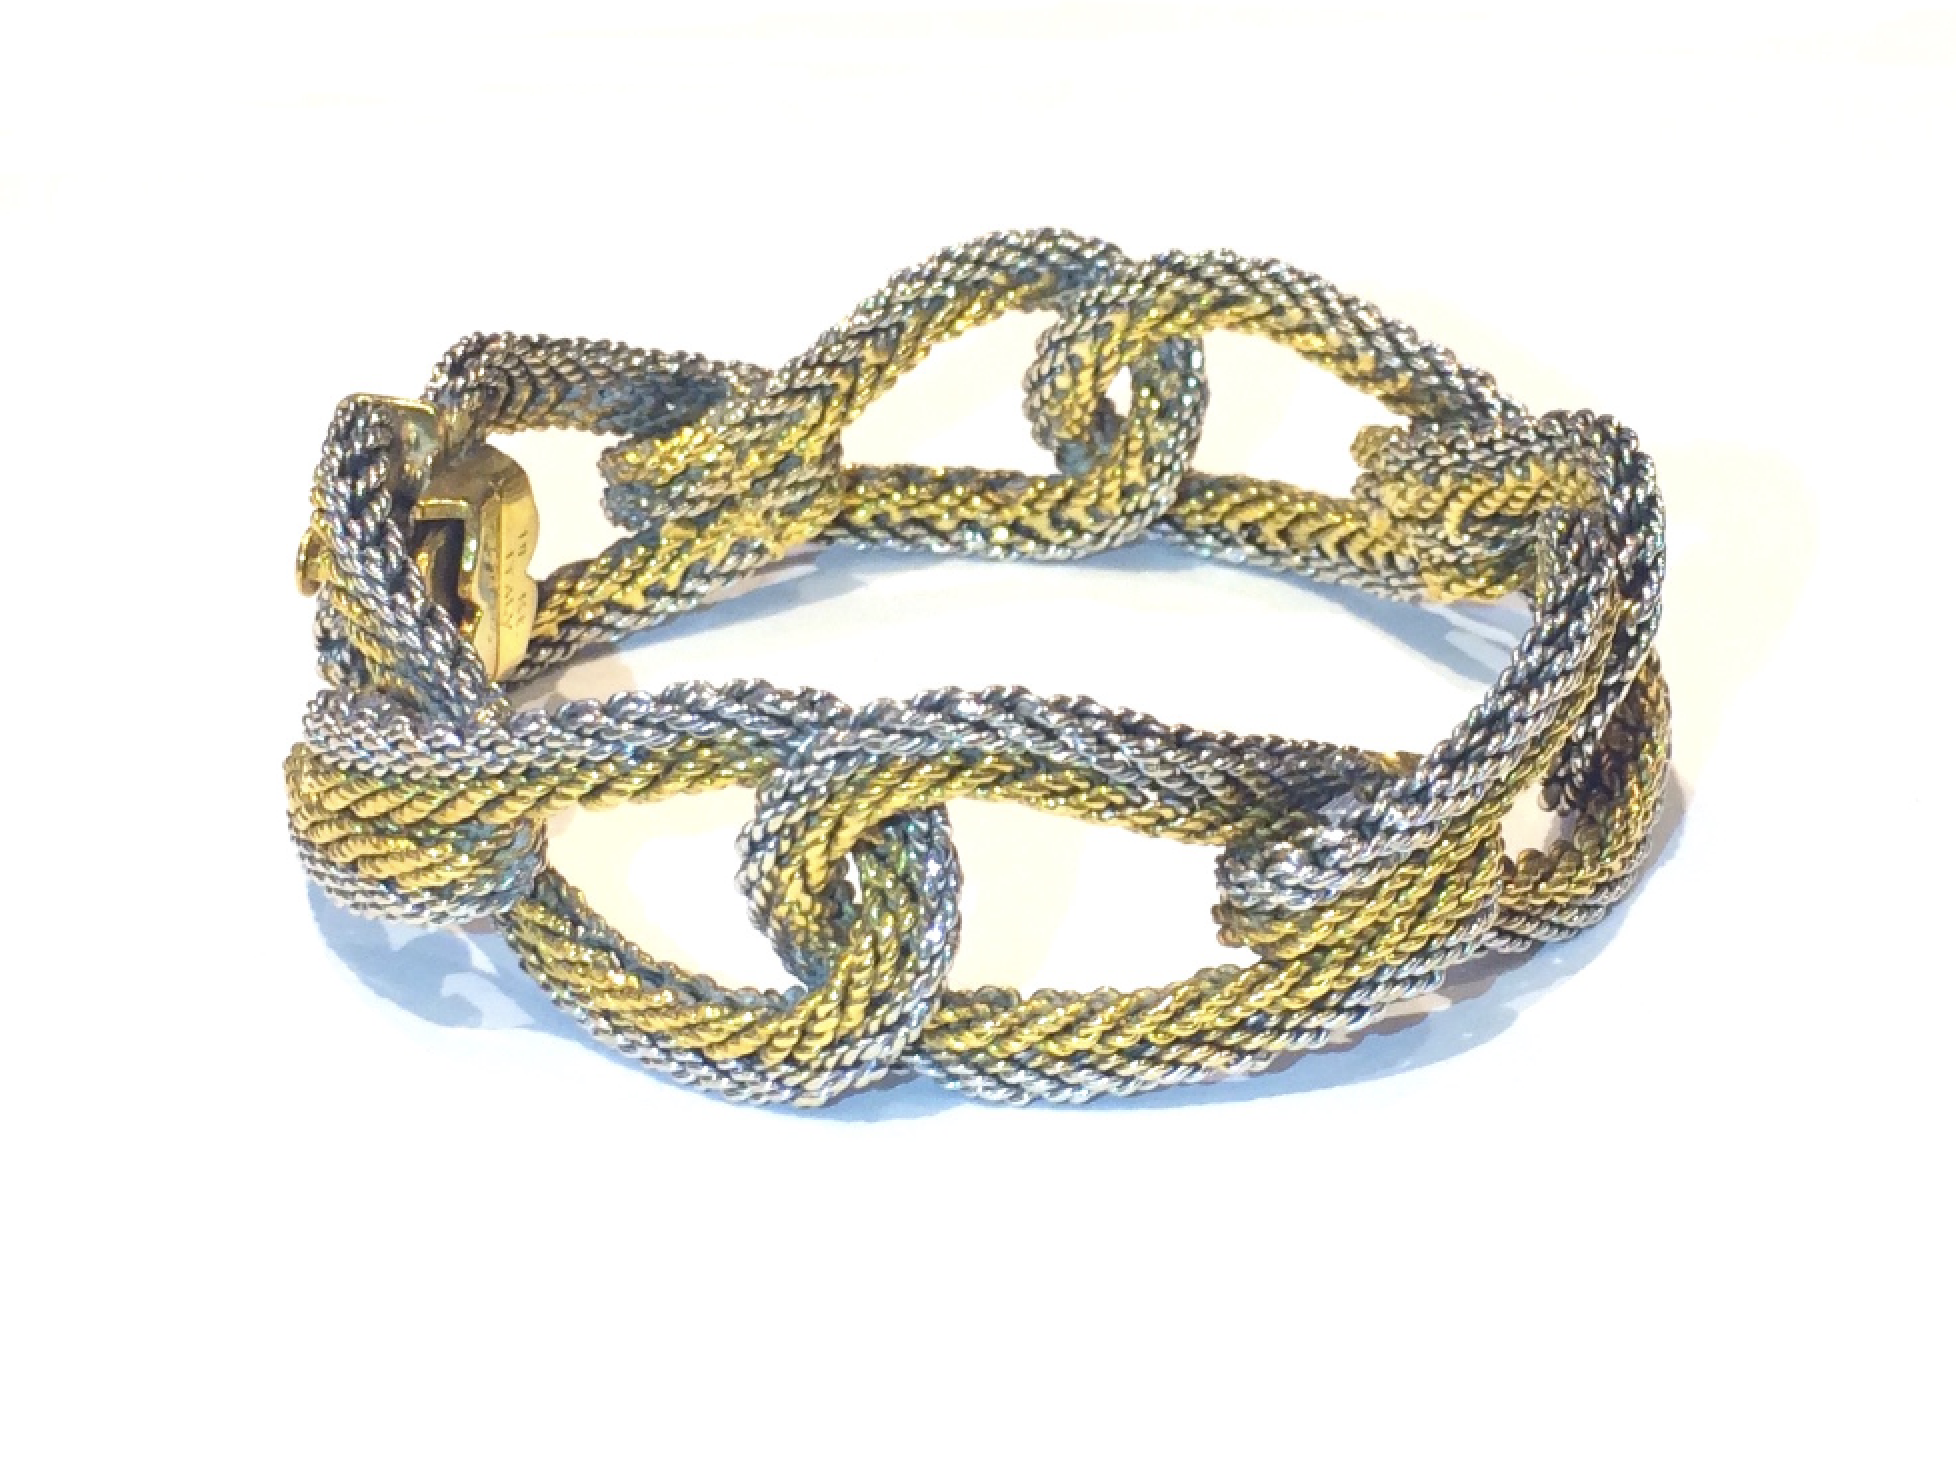 Cartier “Woven Loop” bracelet, yellow and white 18K gold, signed, c. 1950’s